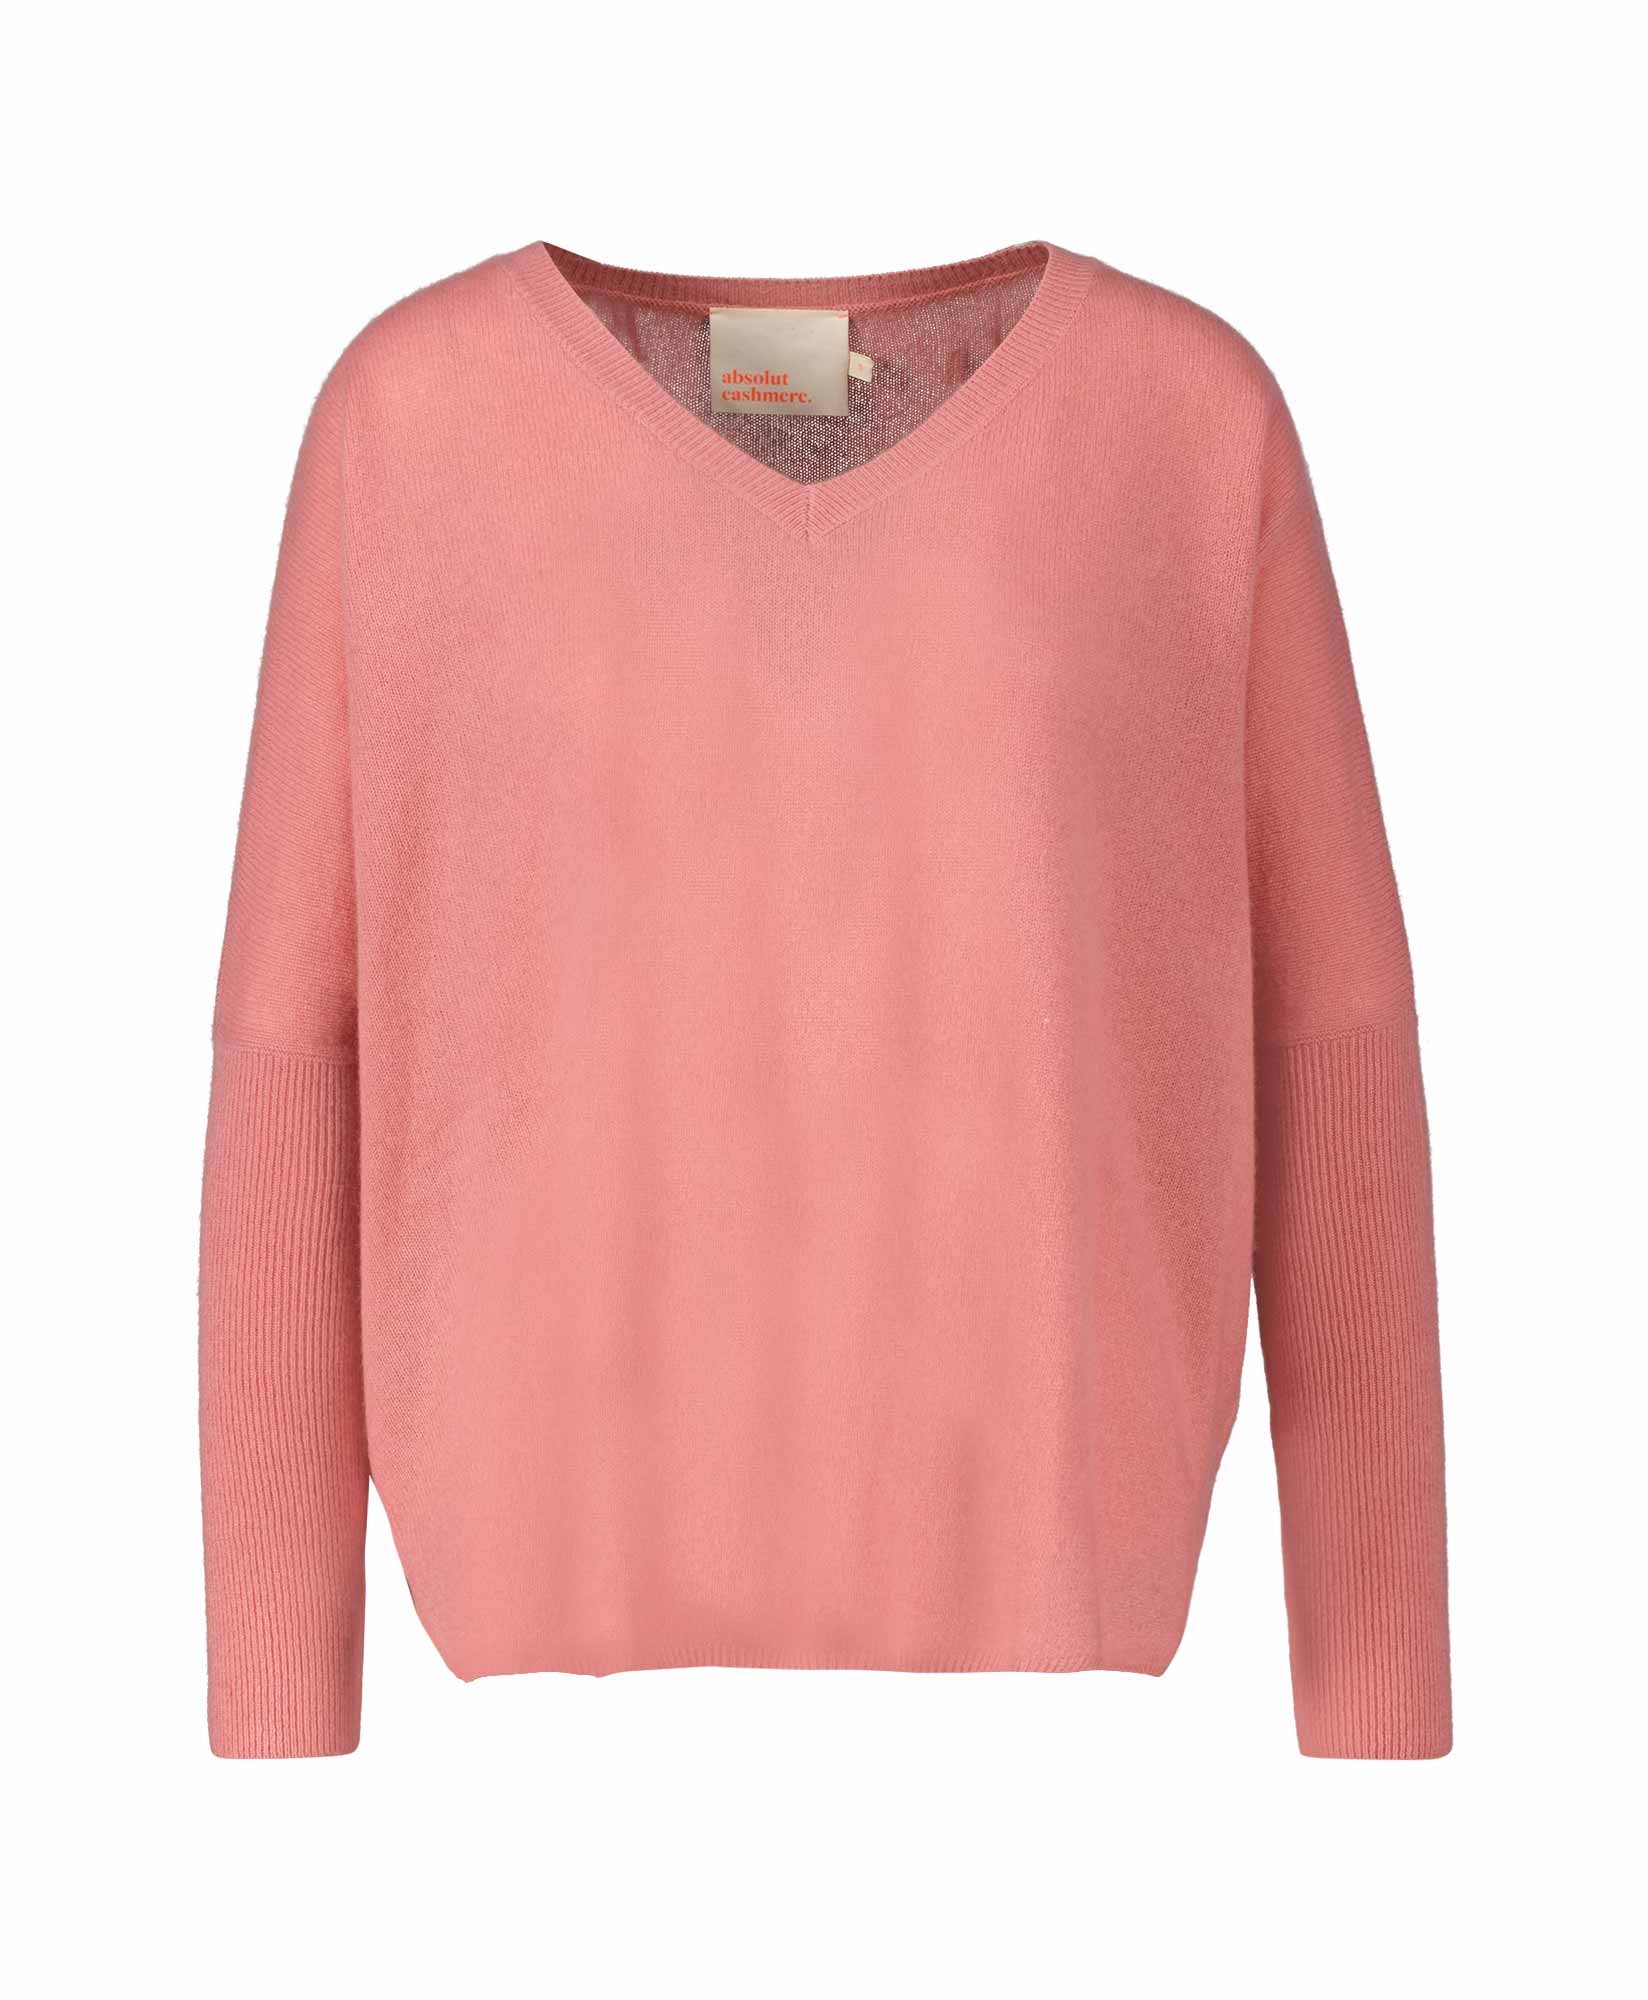 Absolut Cashmere Pullover Ac142012c Camille Rose